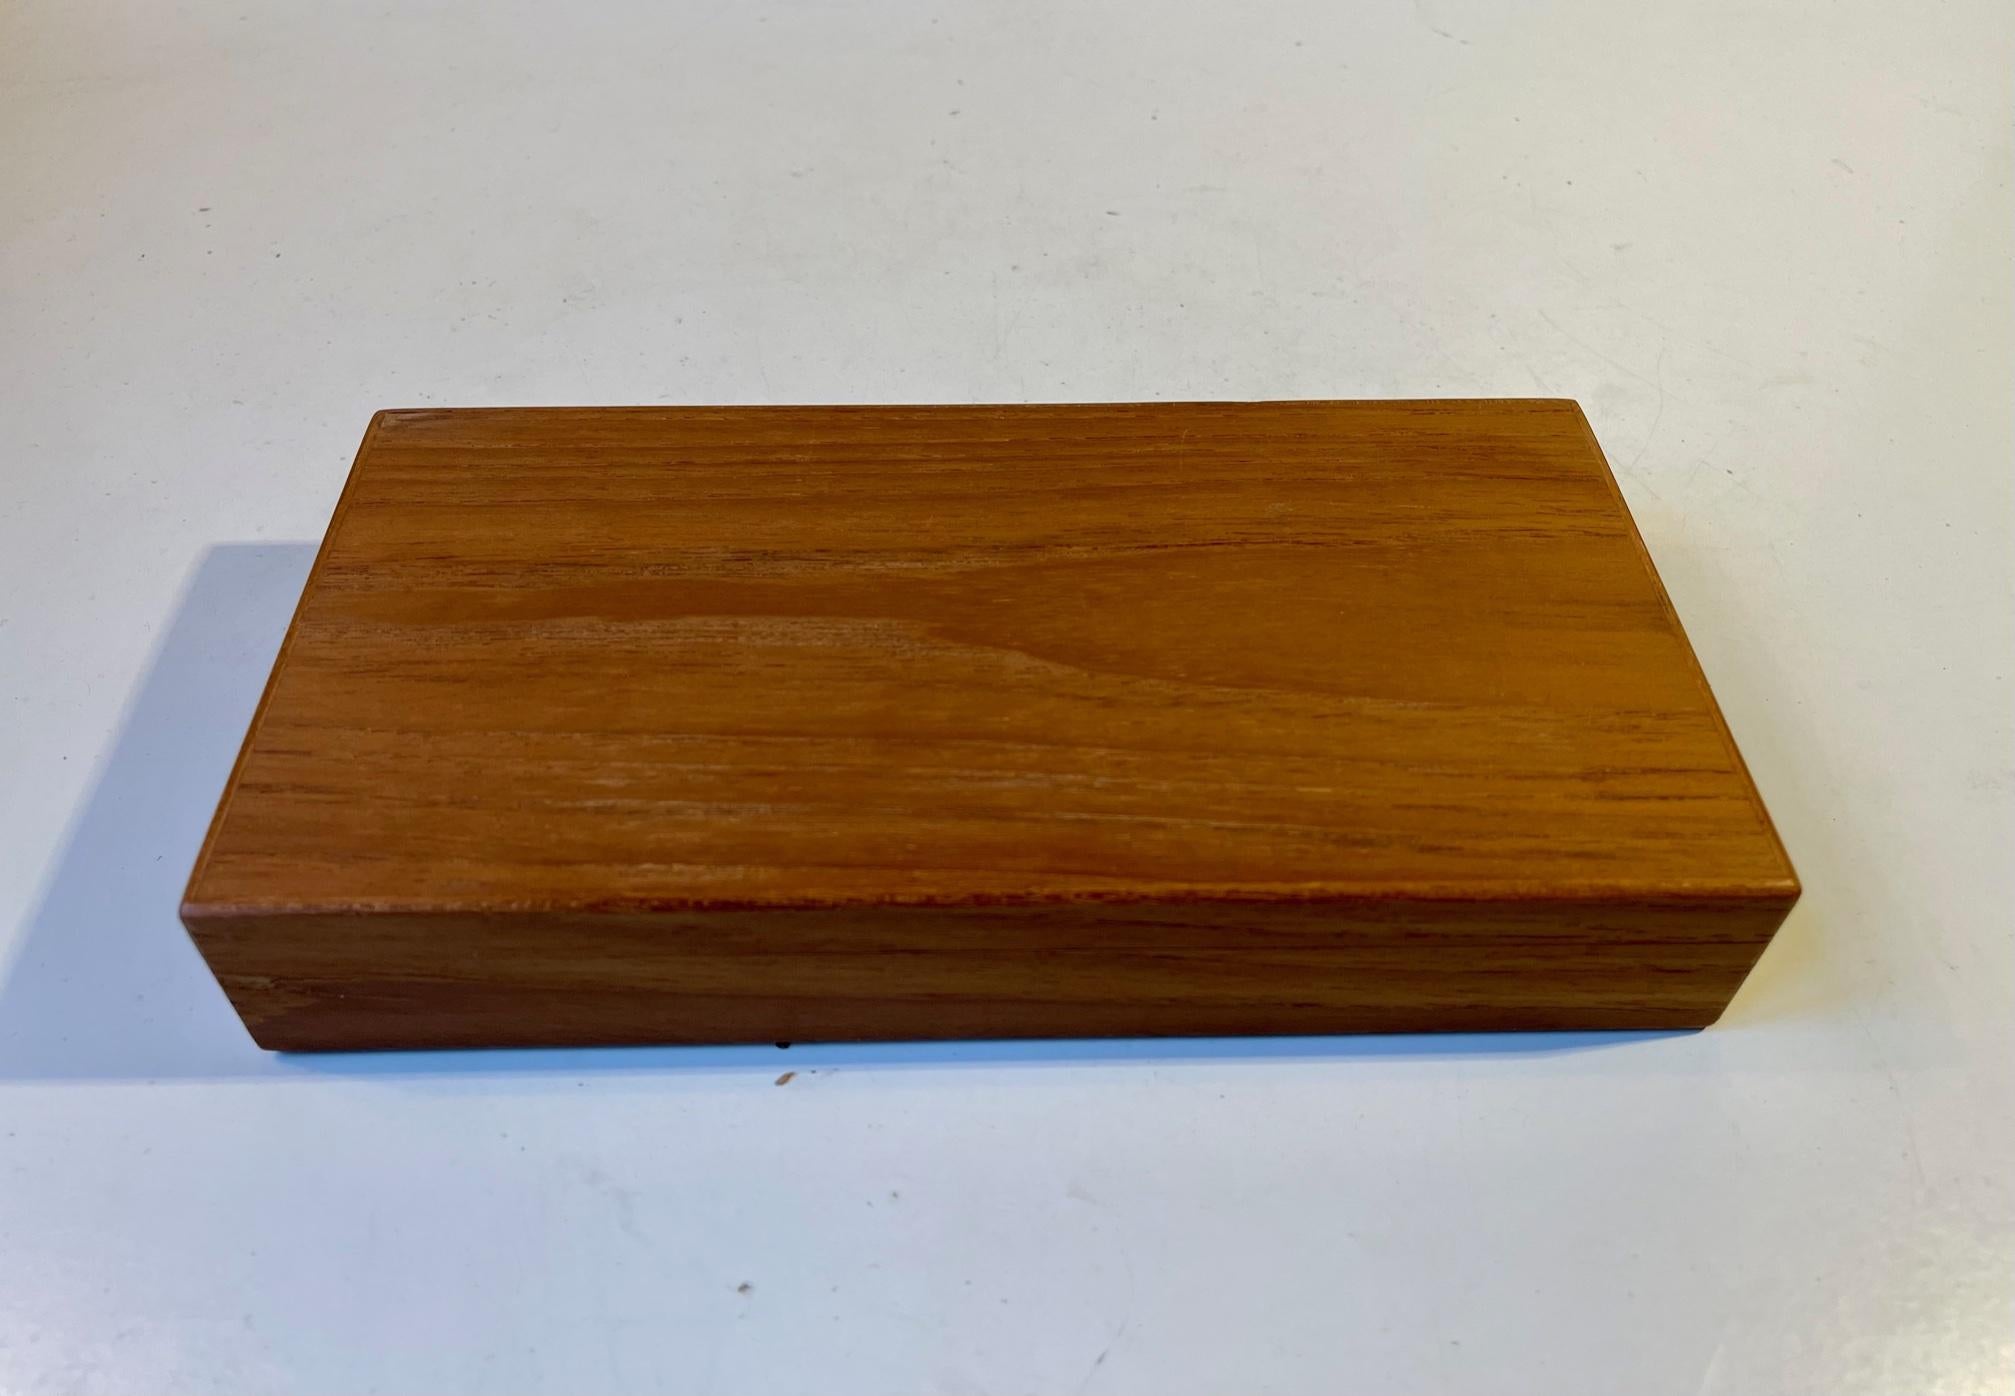 A wellmade solid teak box with one large compartment lined with cork. Made anonymously in Denmark during the 1960s in a style reminiscent of Alfred Klitgaard, Kay Bojesen and Finn Juhl. Measurements: 22 x 11 x 4 cm.